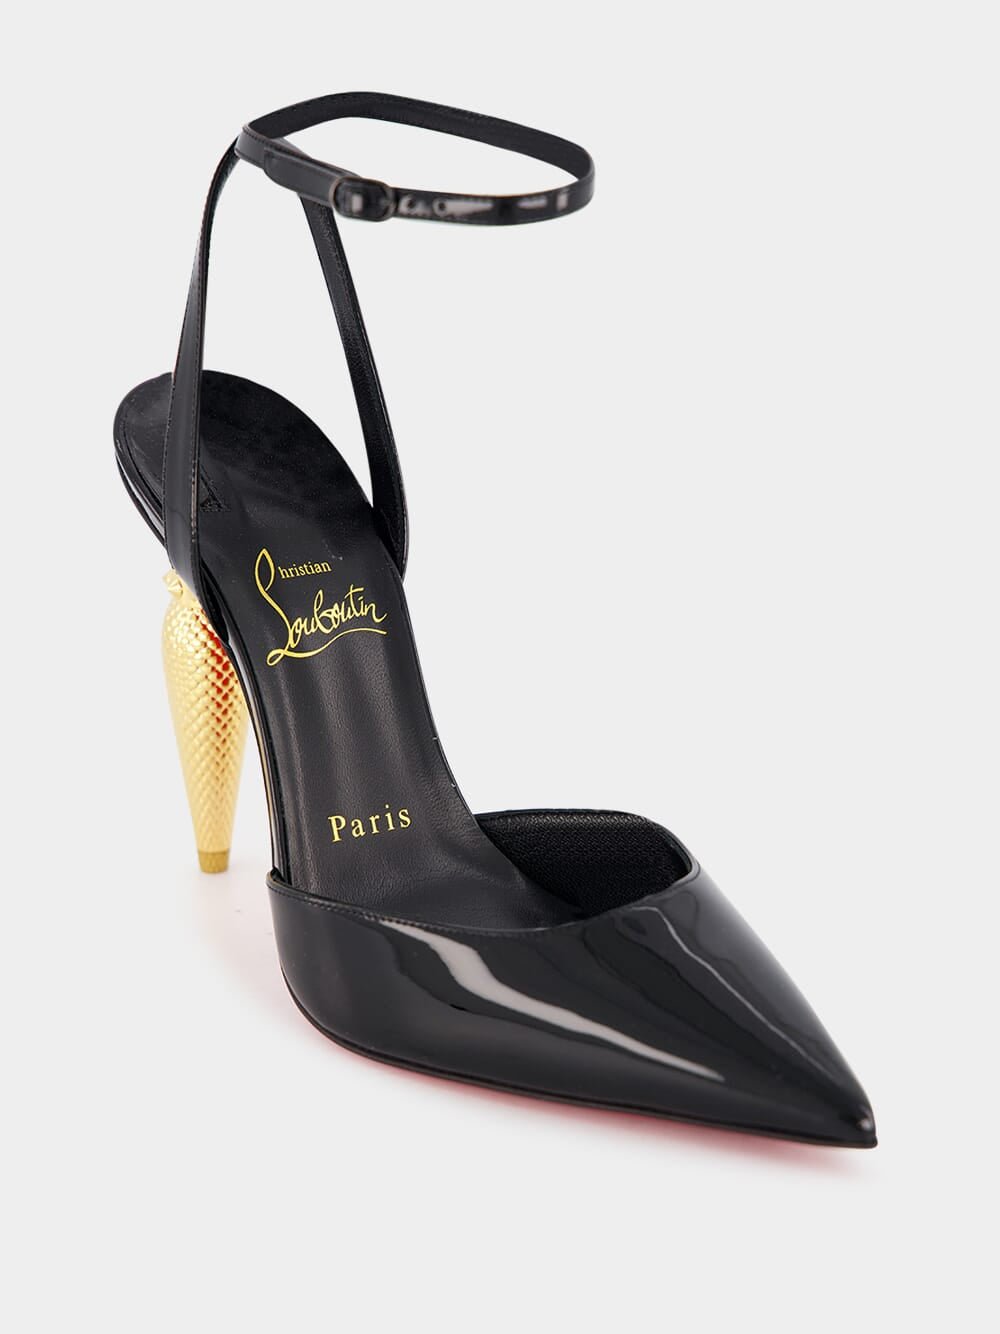 Christian LouboutinLipChick 100mm Patent-Leather Pumps at Fashion Clinic